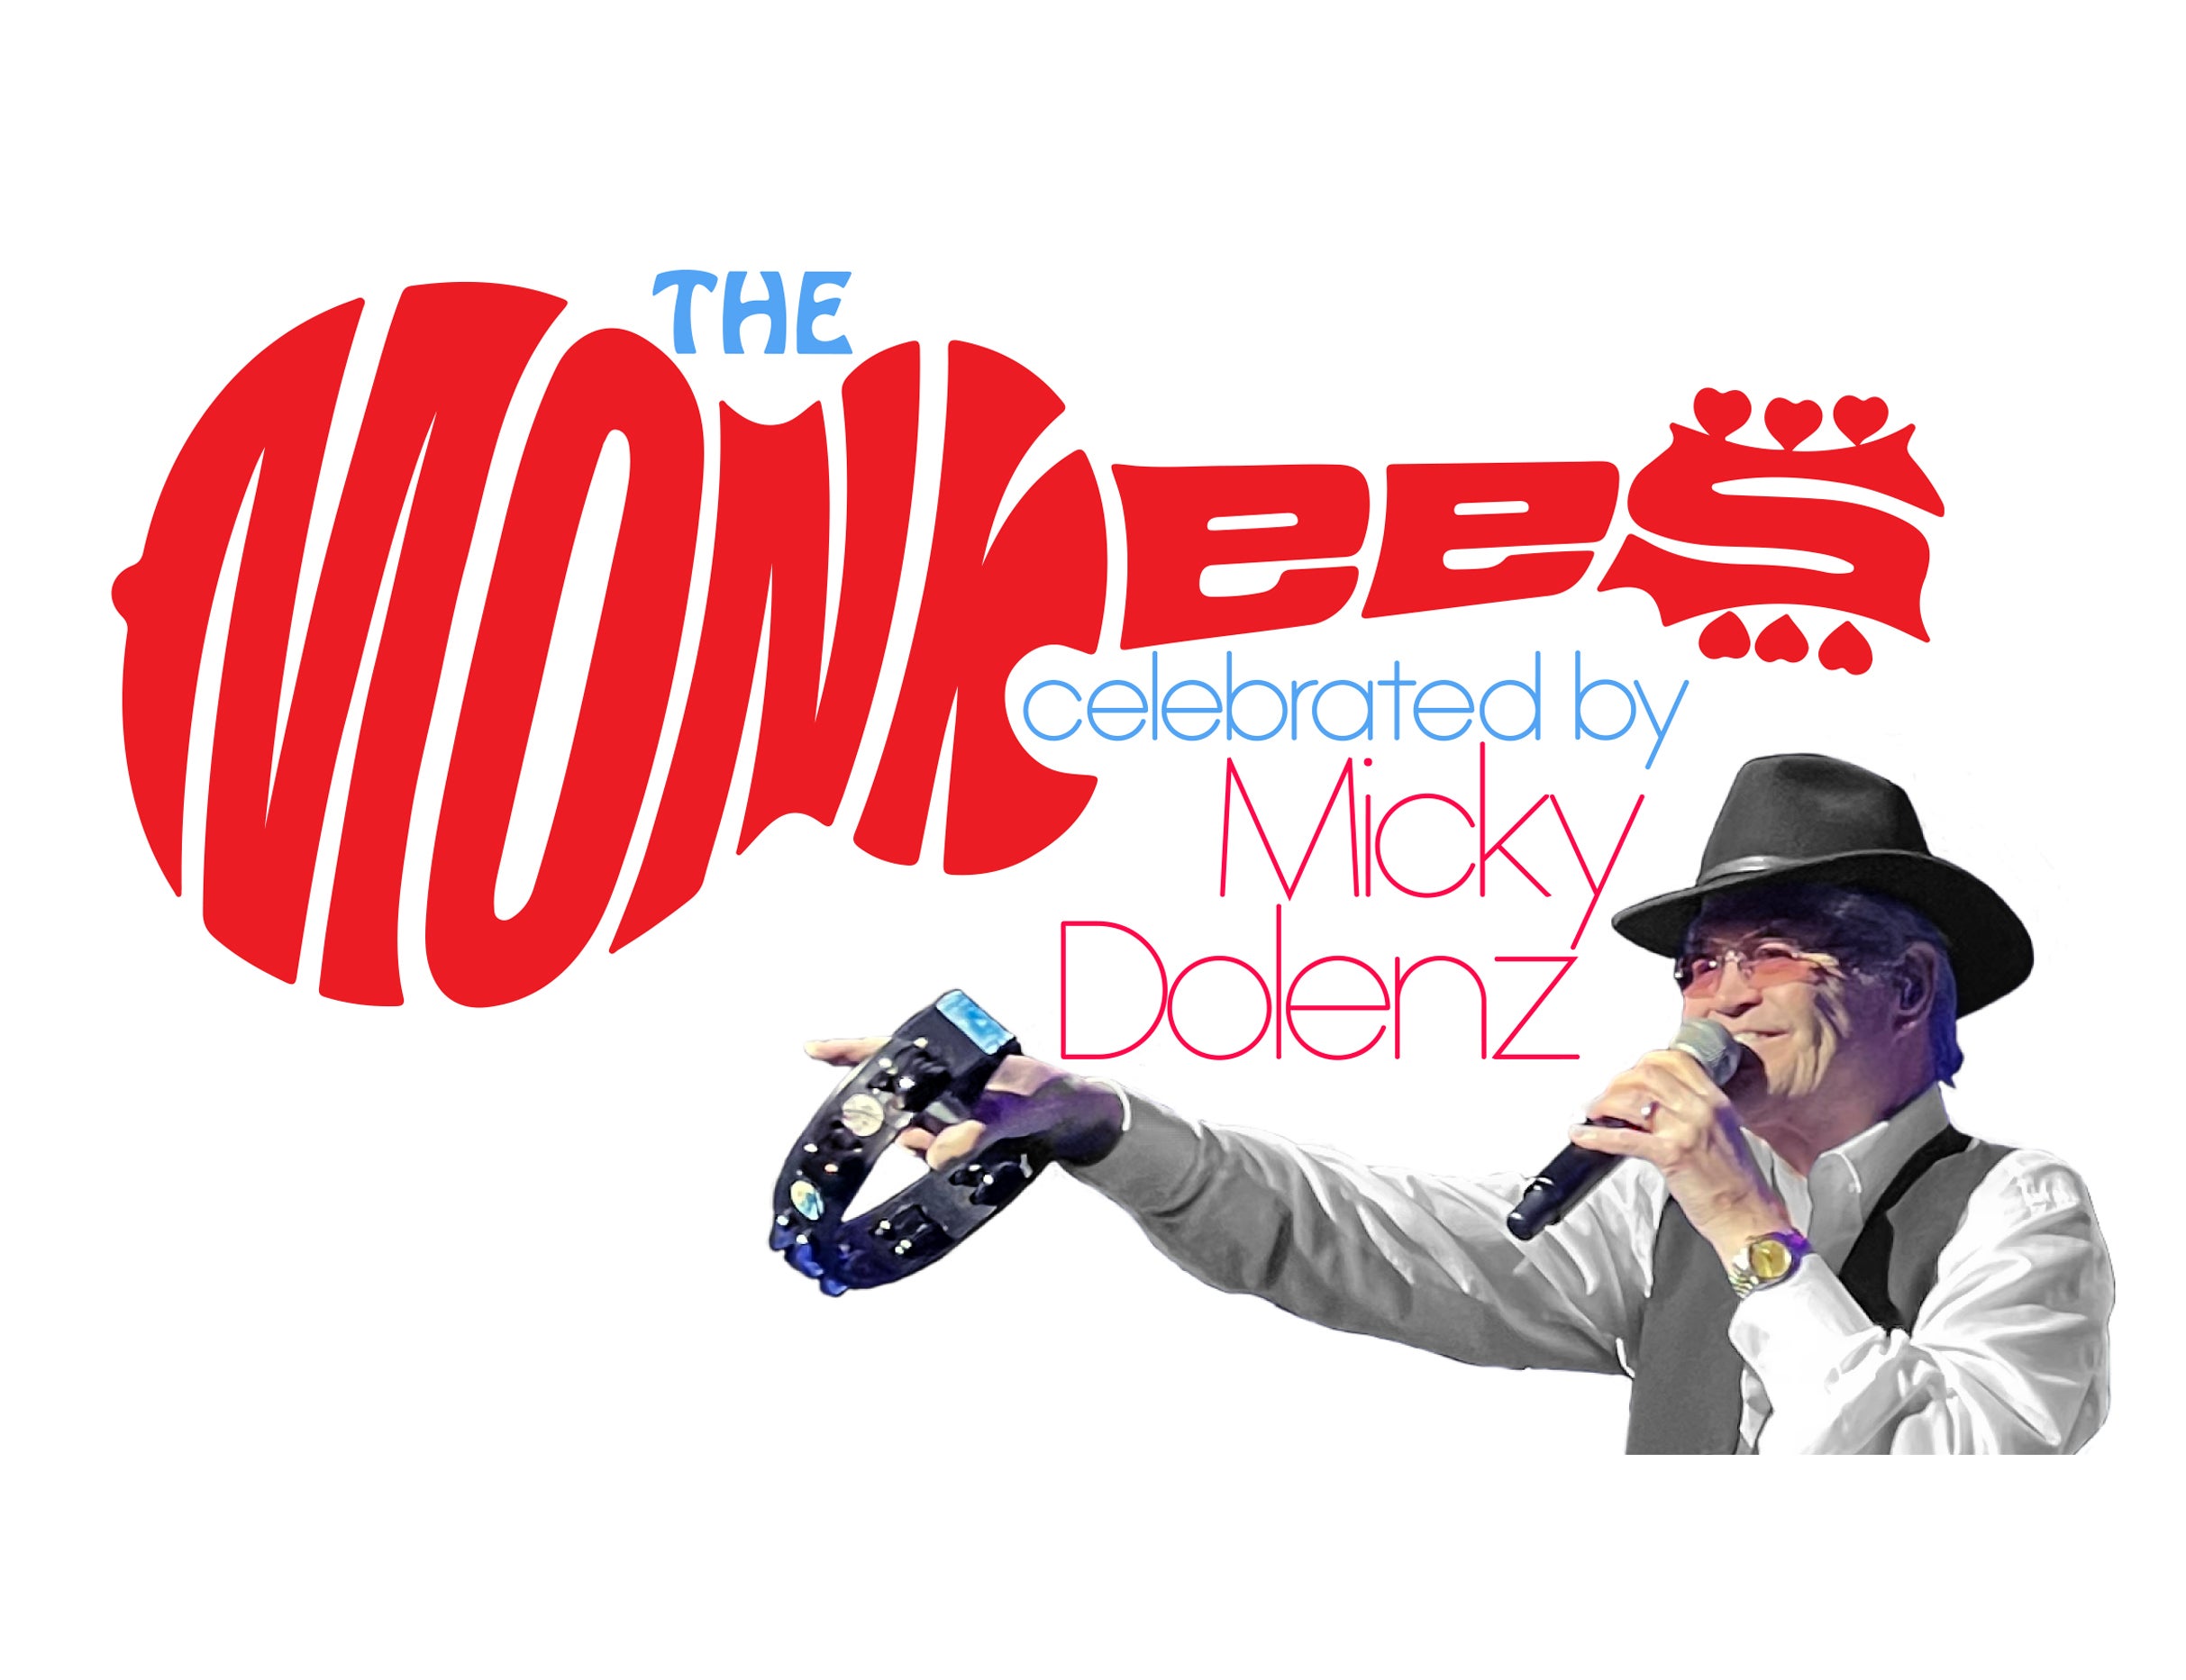 The Monkees Celebrated By Micky Dolenz in Englewood promo photo for VIP Package presale offer code